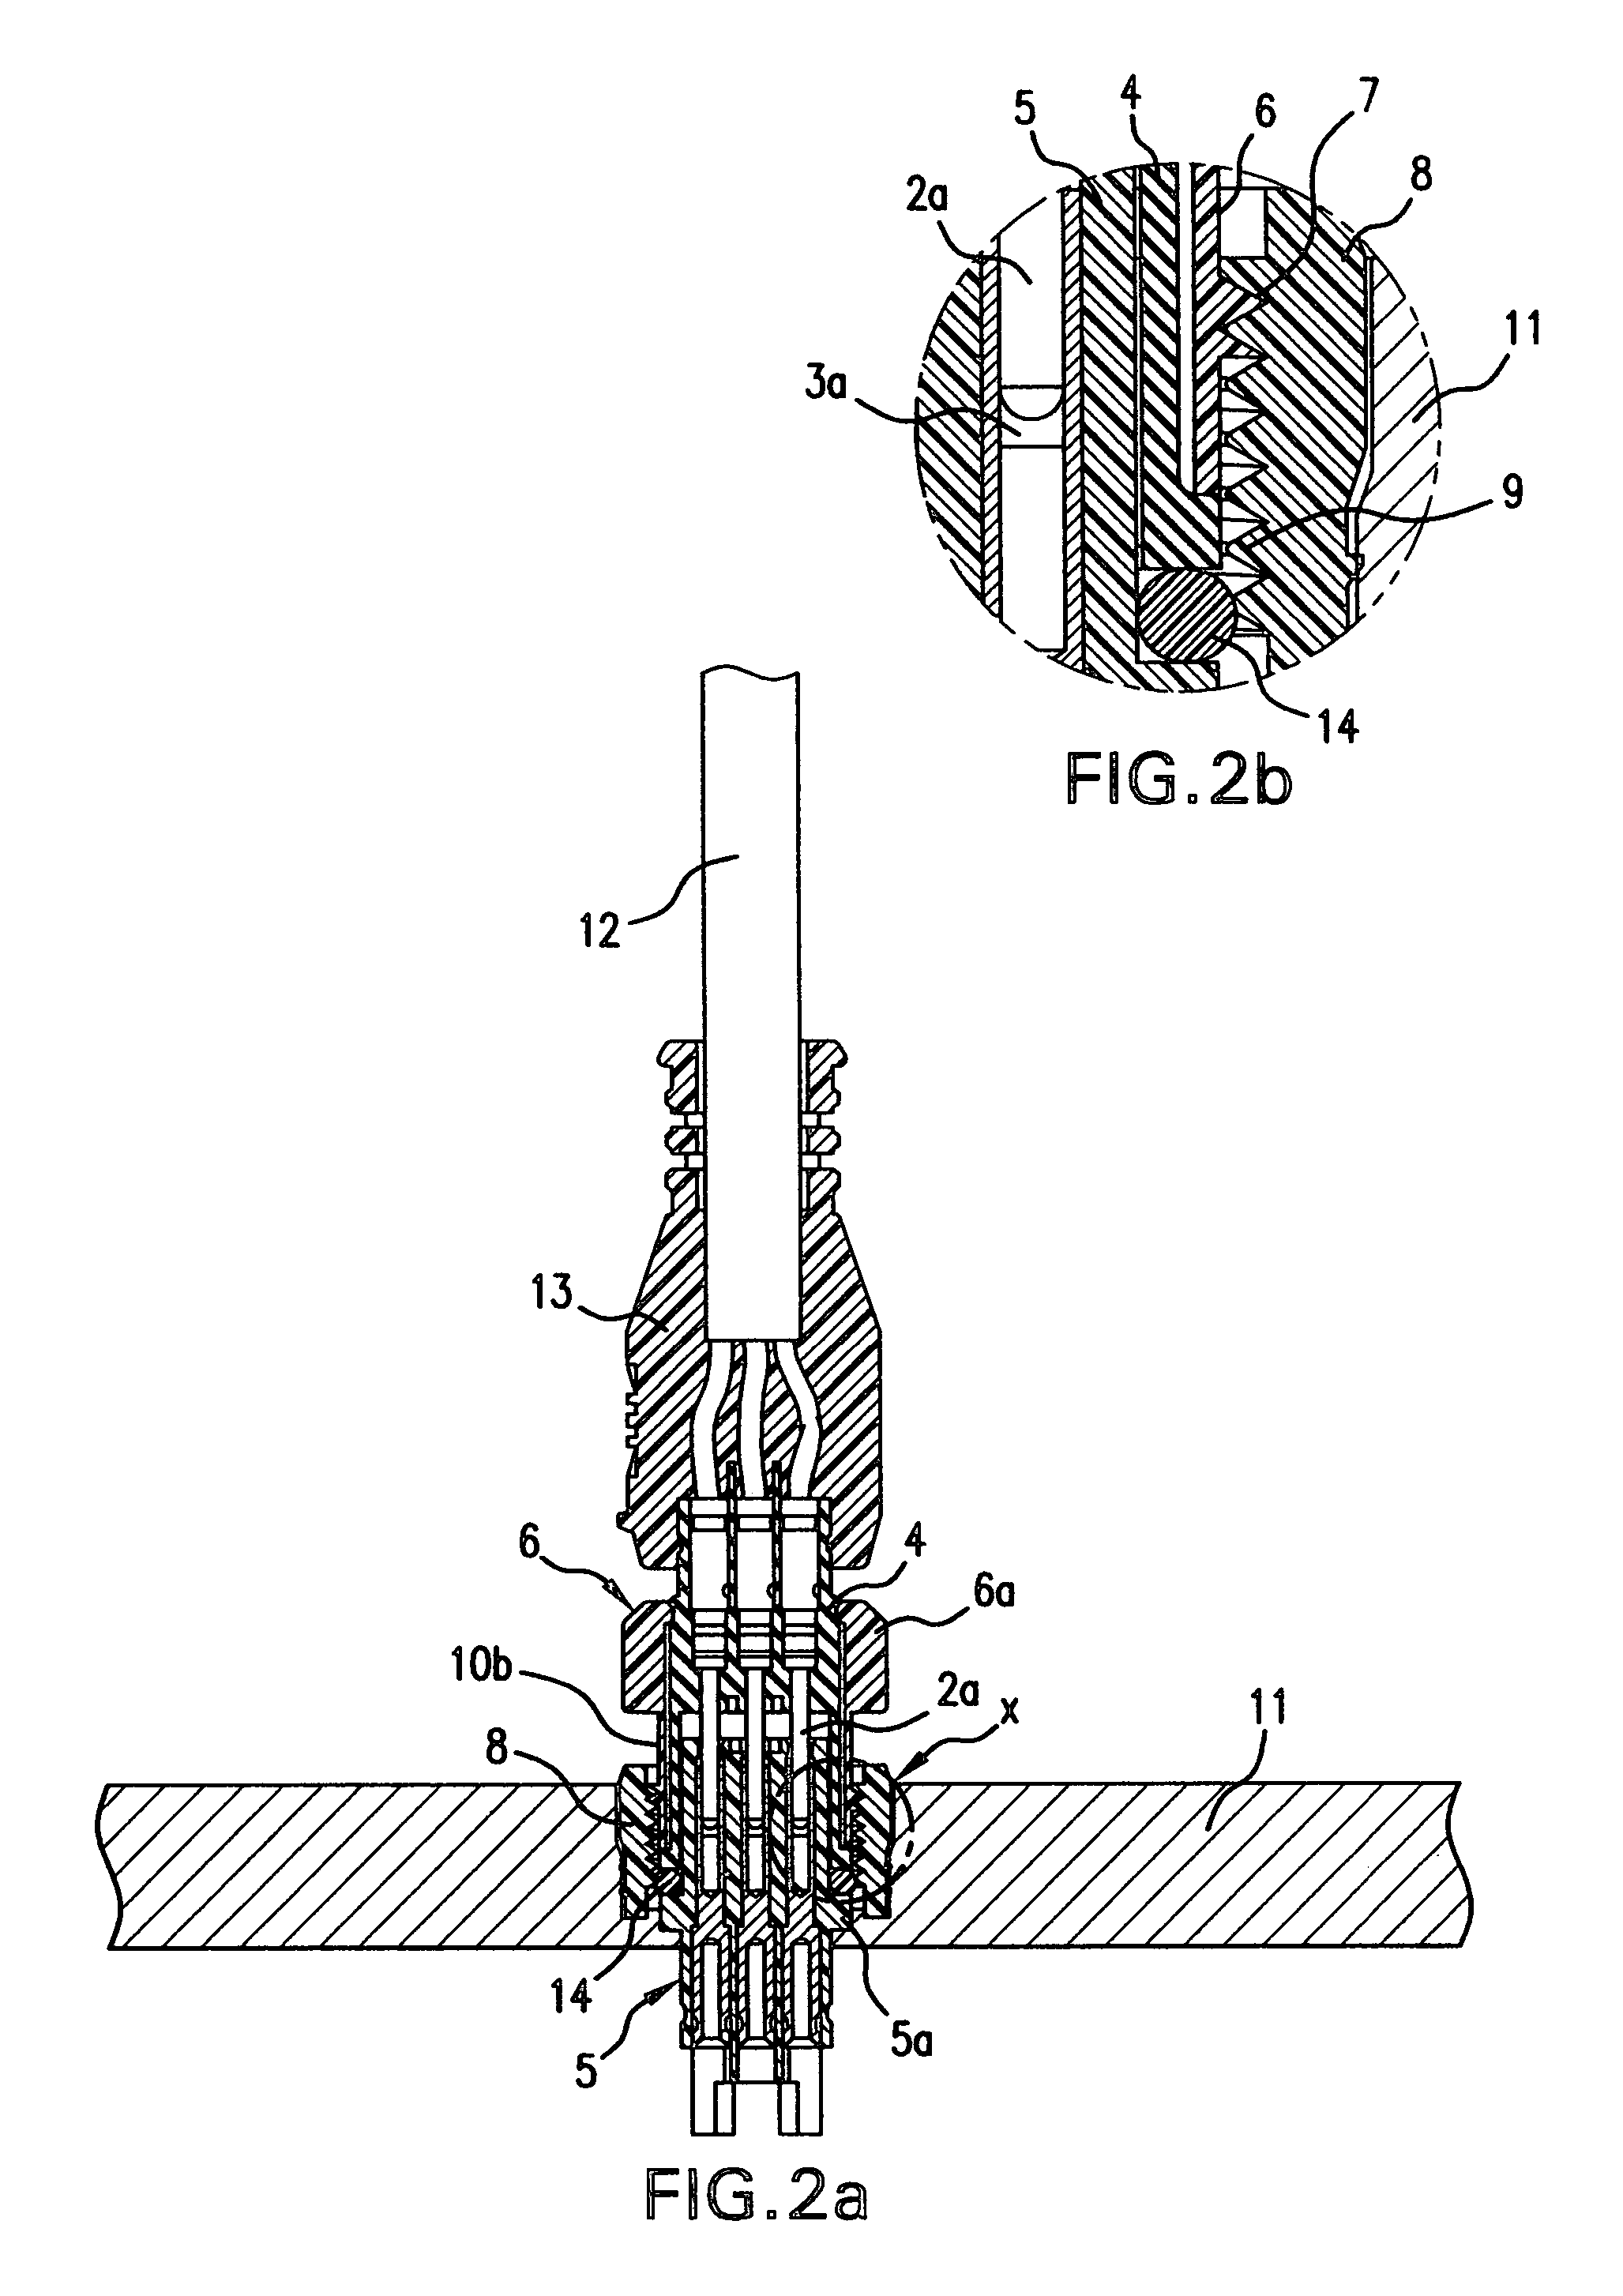 Electrical connector having plug and socket components